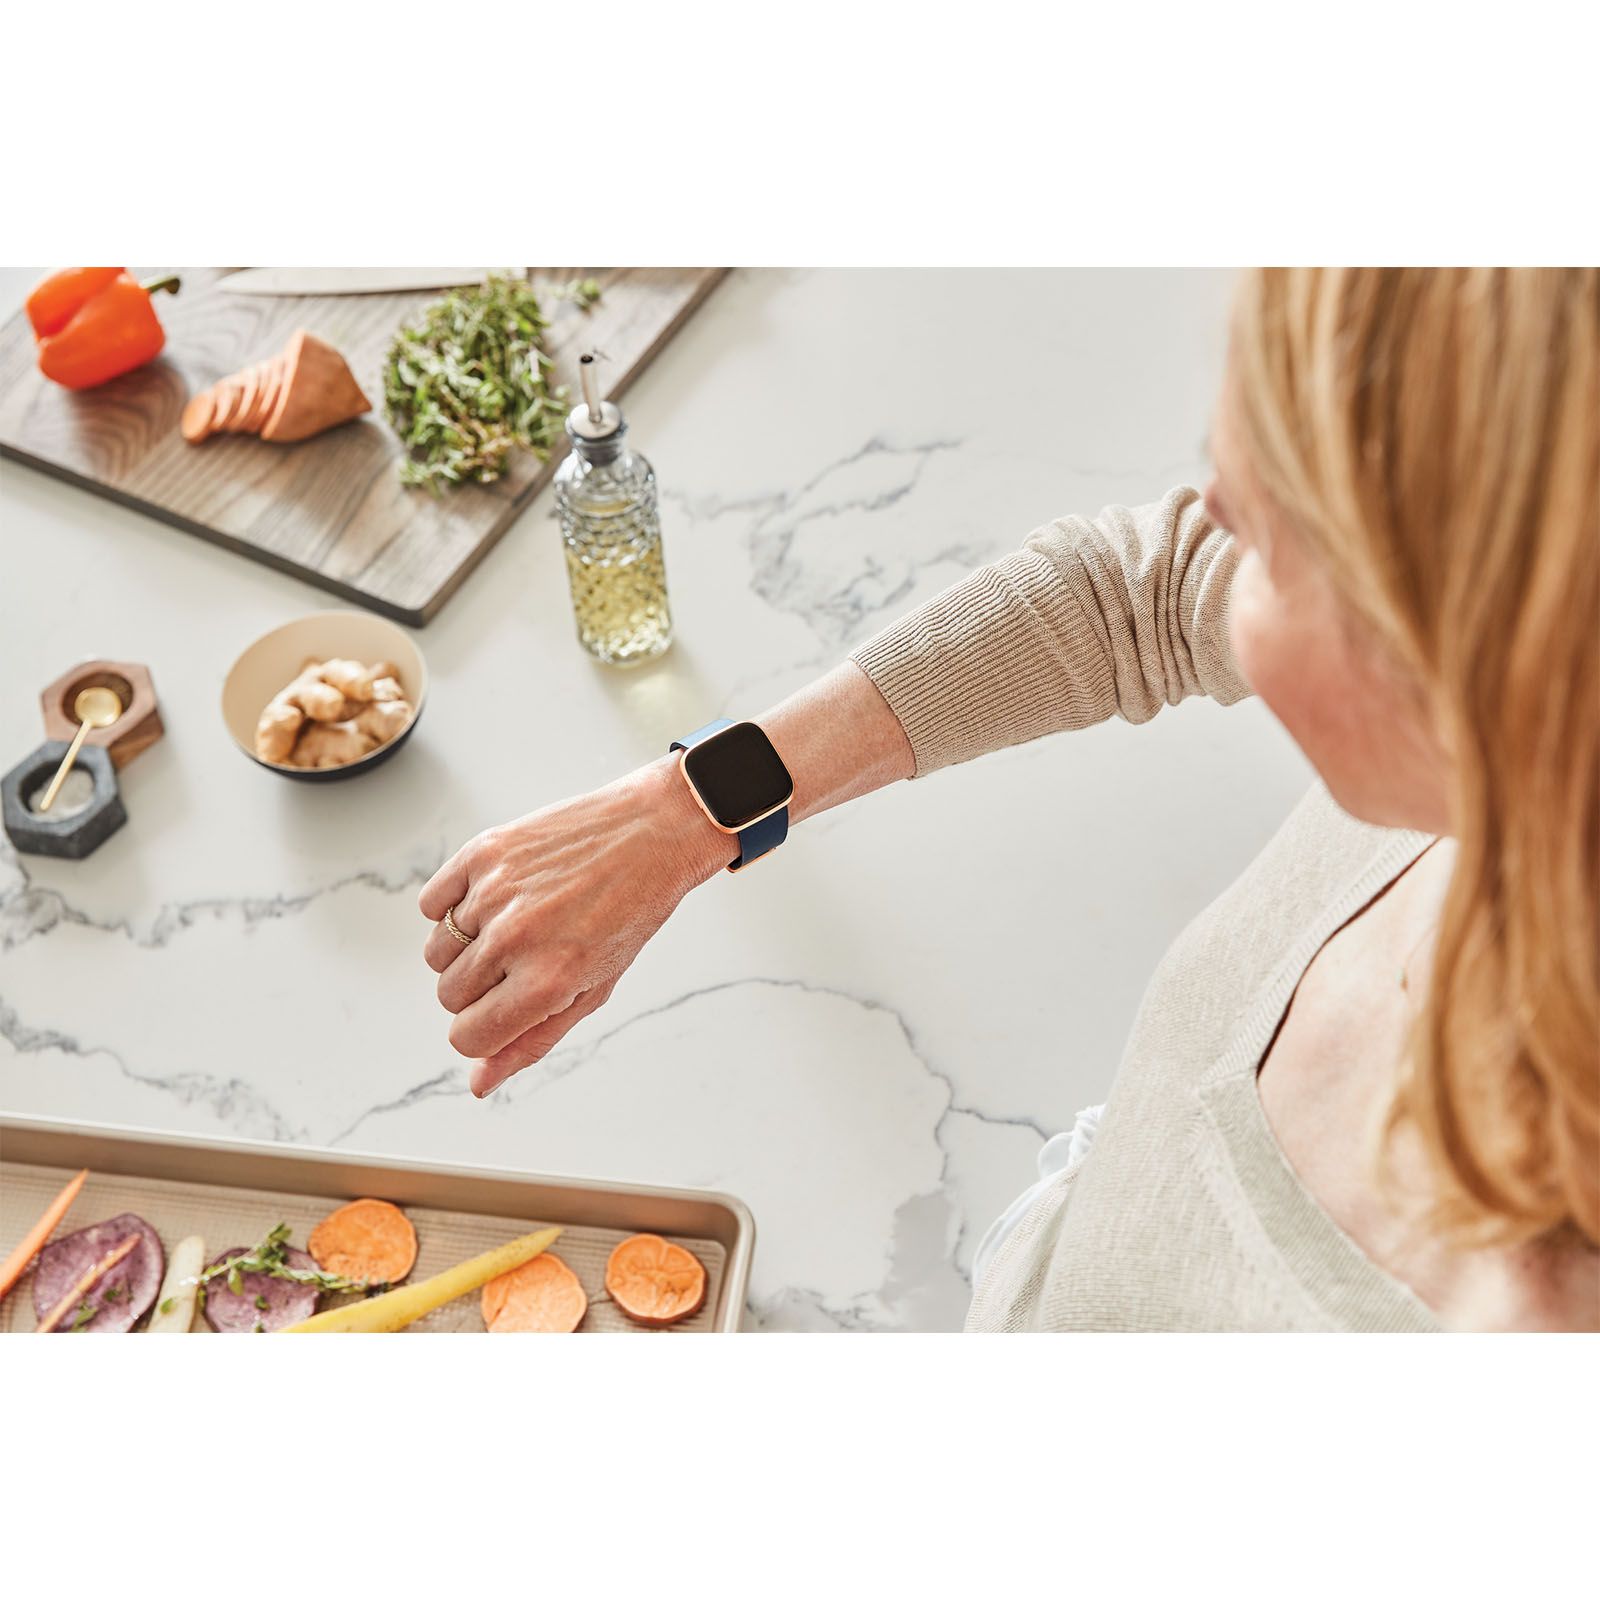 Fitbit Versa 2 Smartwatch, Petal - Additional Band Included